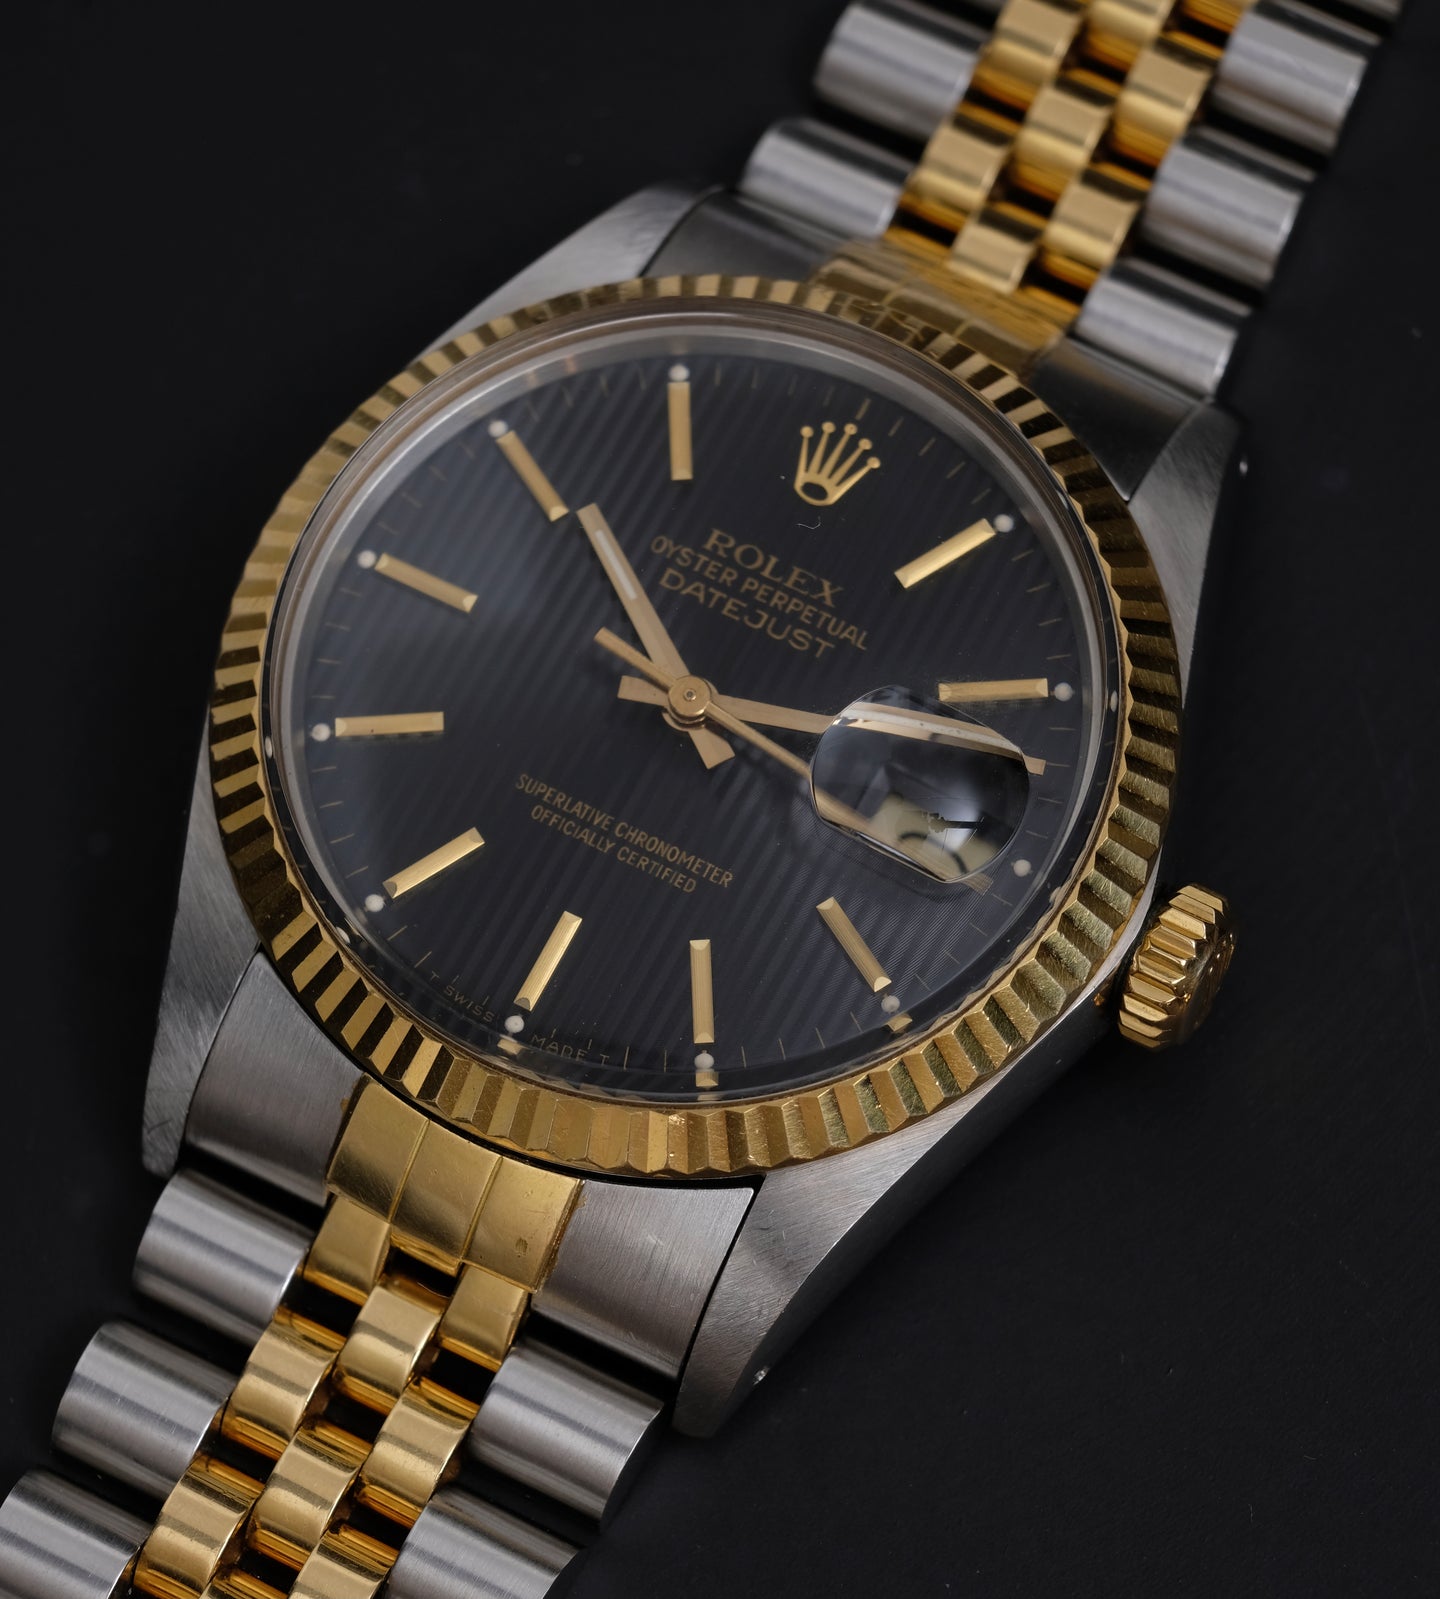 Rolex Datejust 16013 Black Tapestry Dial 1987